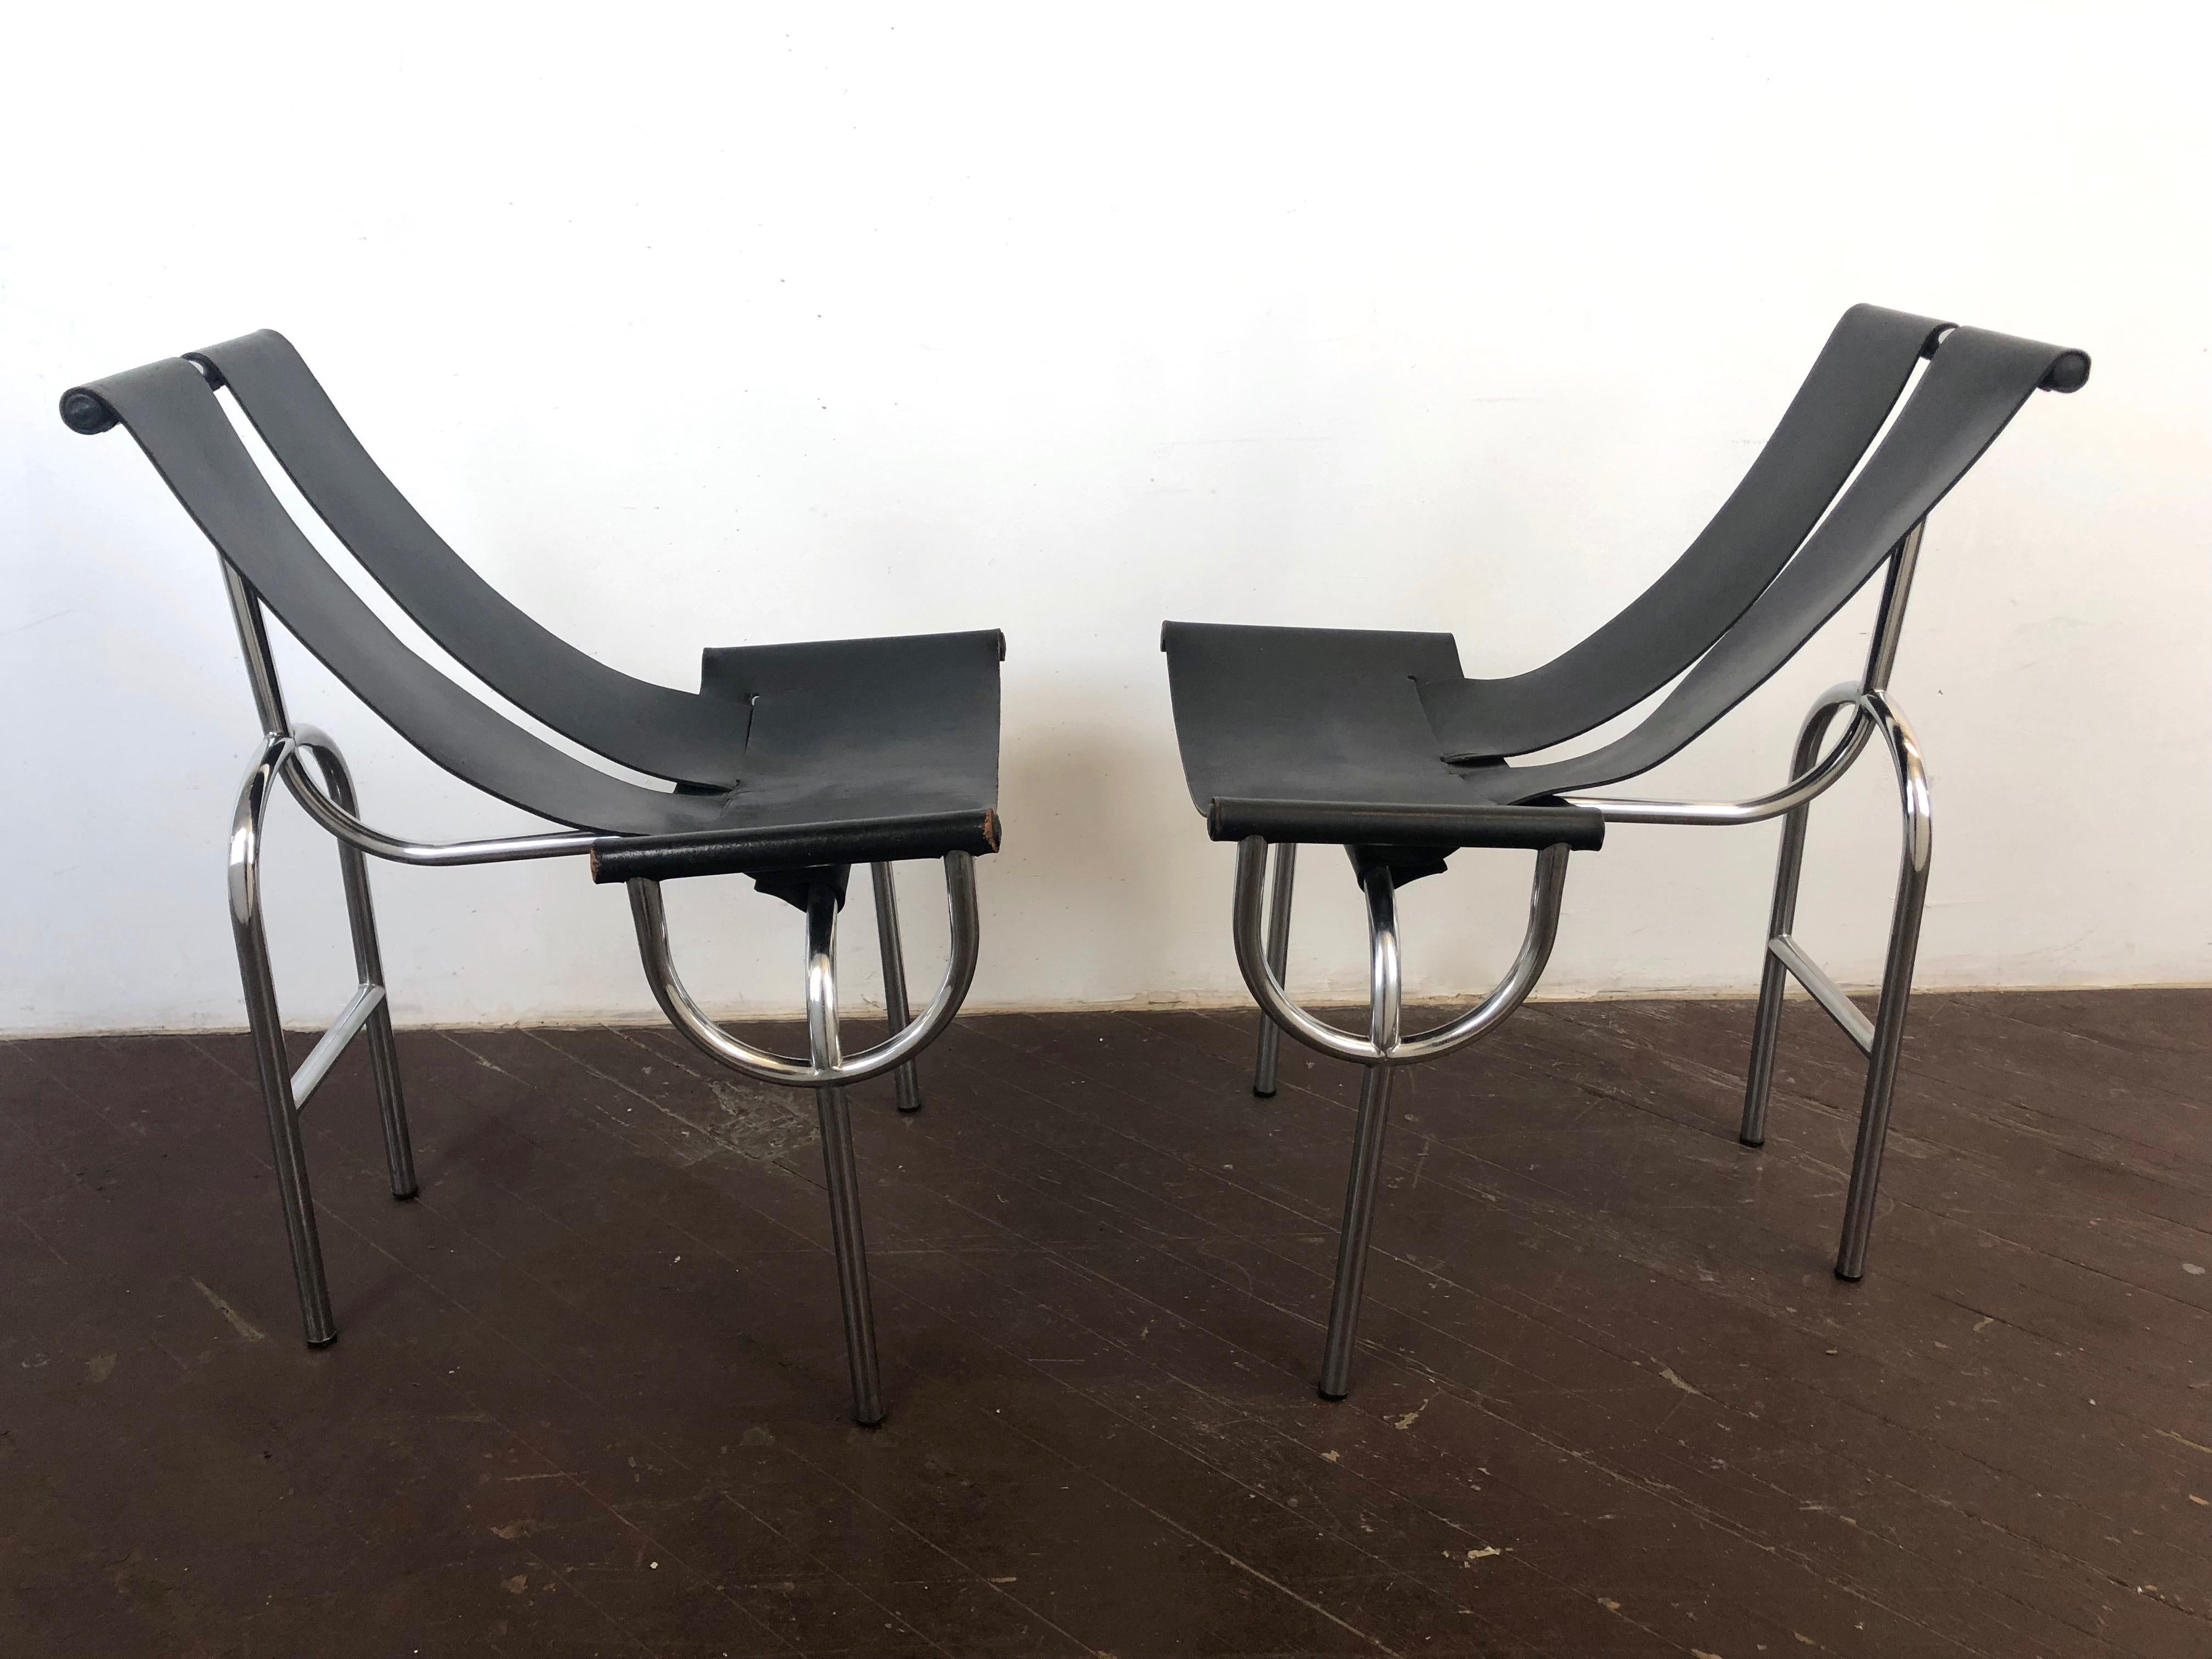 Pair of TRI 15 Chairs by Roberto Gabetti & AImaro Isola for Arbo, Italy, 1968 For Sale 3